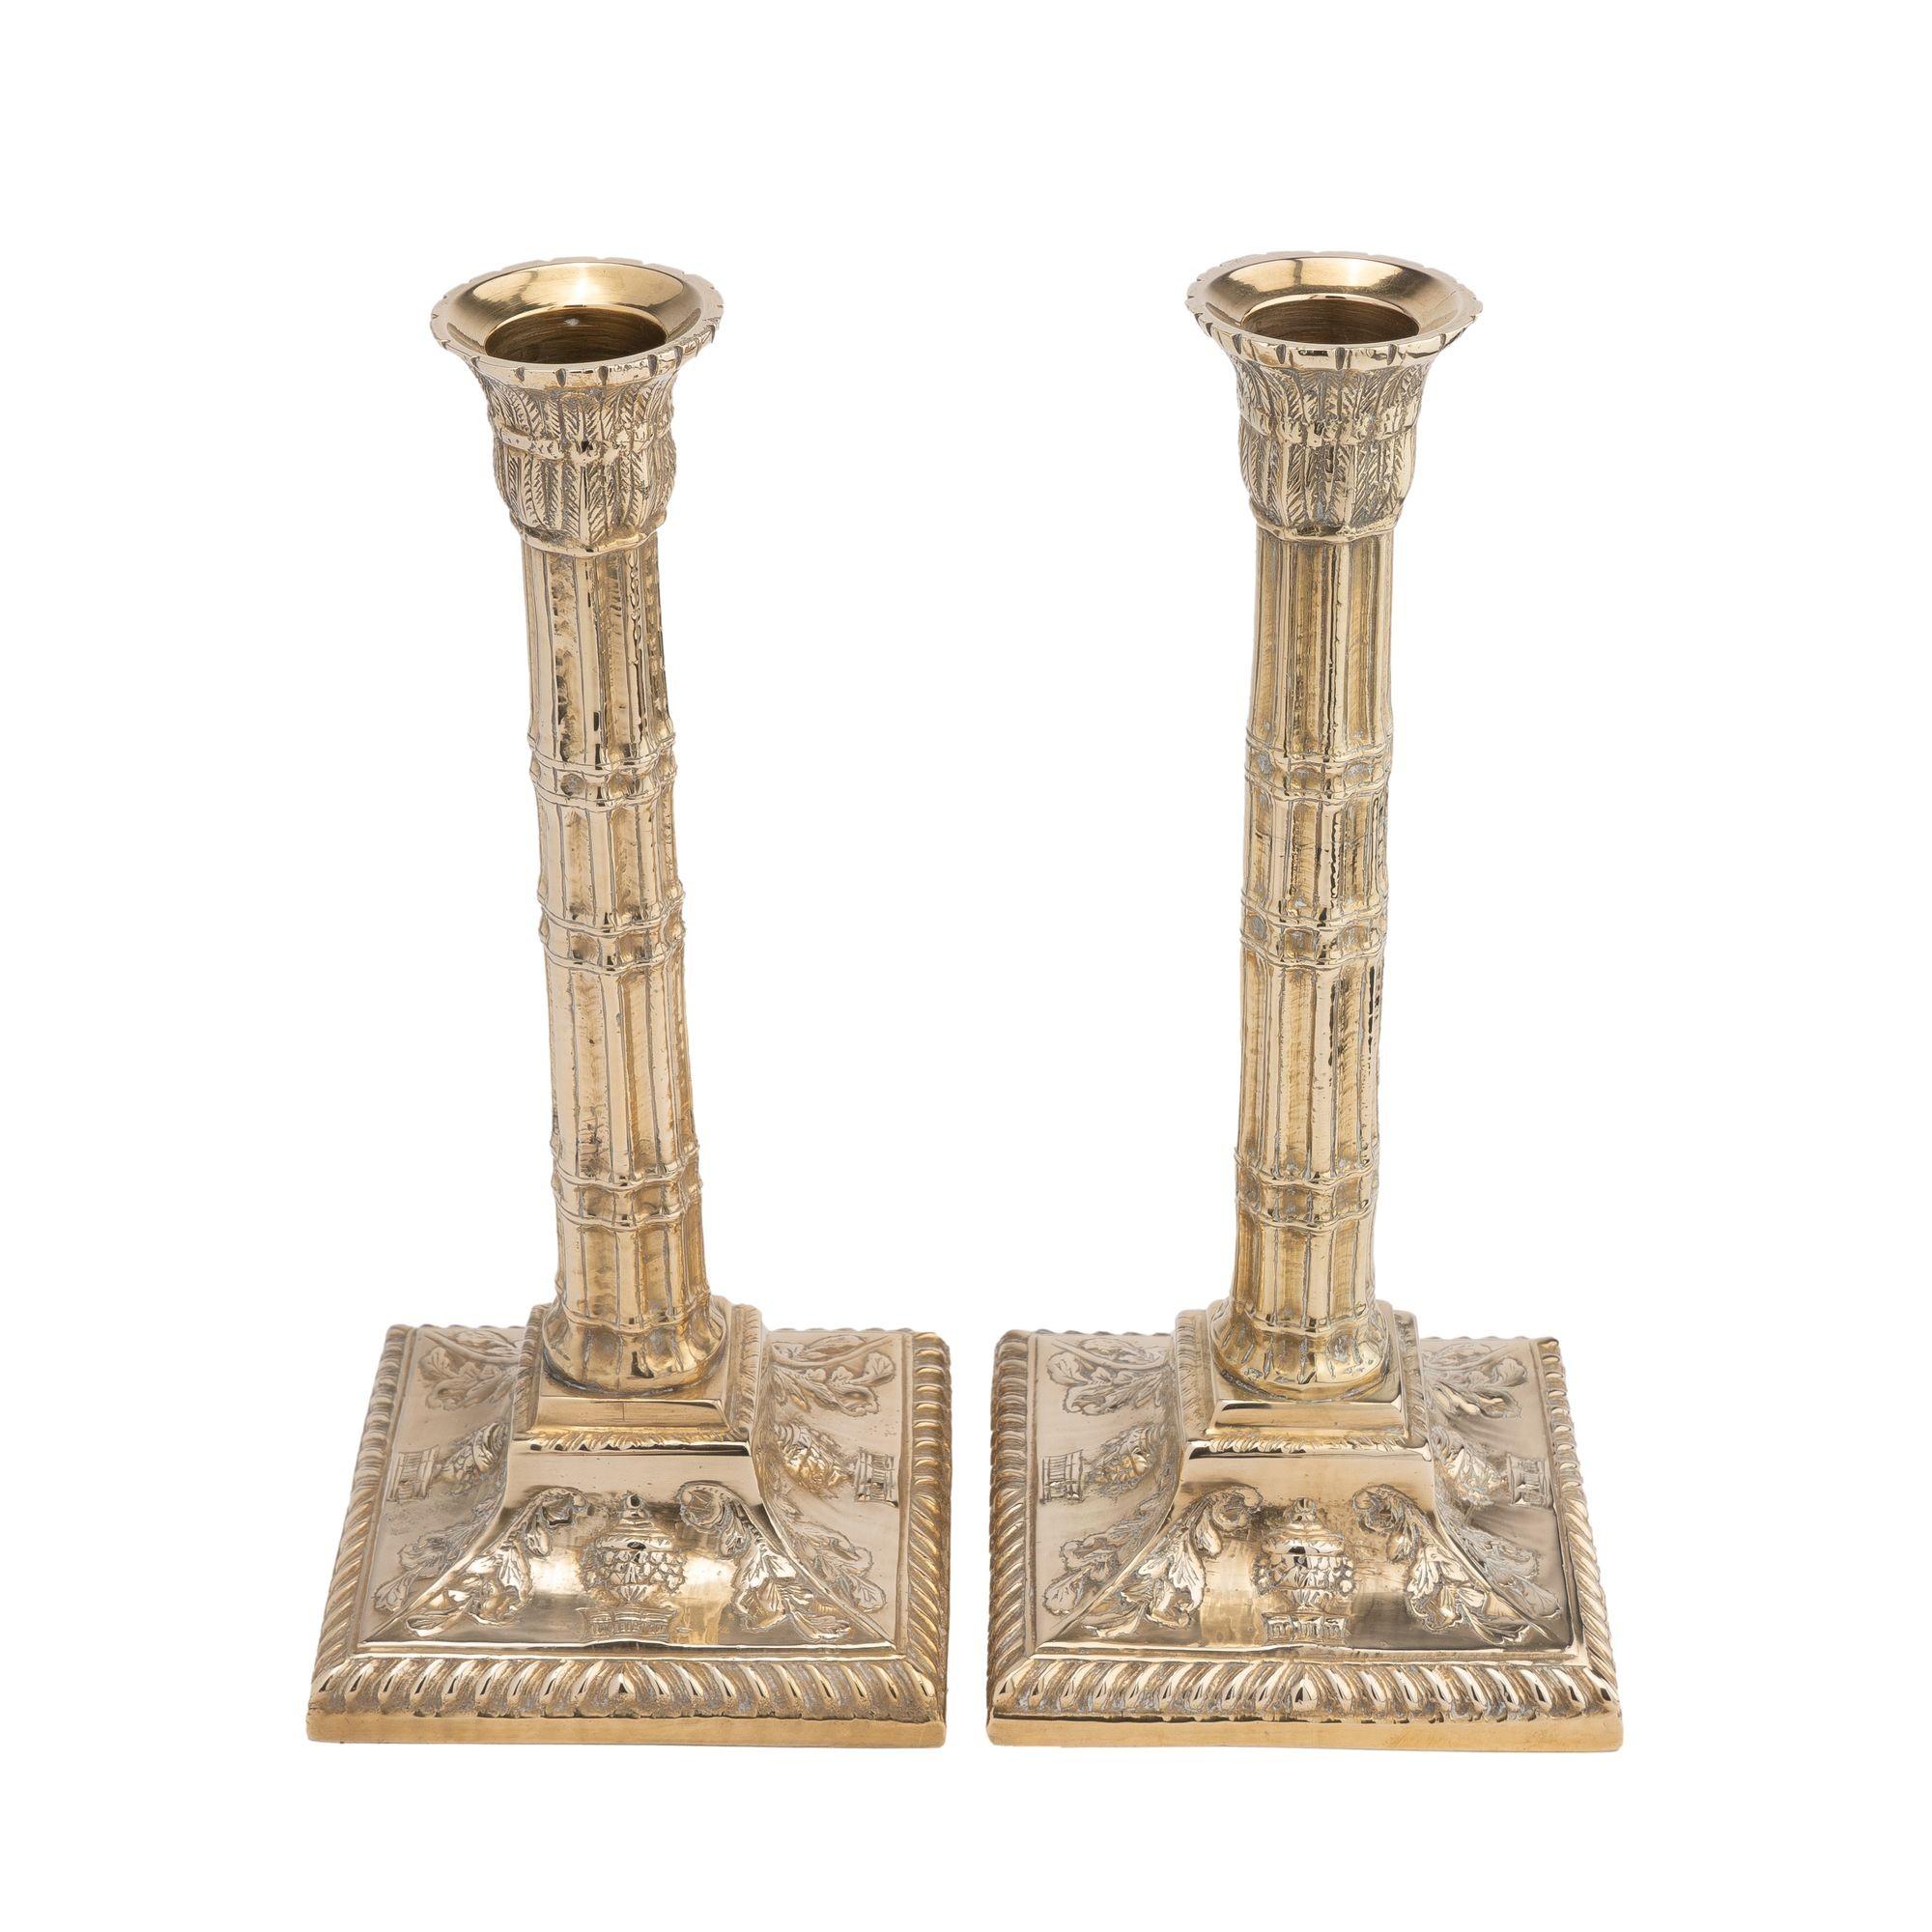 English Pair of cast cluster column candlesticks by Martin, Hall & Co Ltd, 1850-75 For Sale